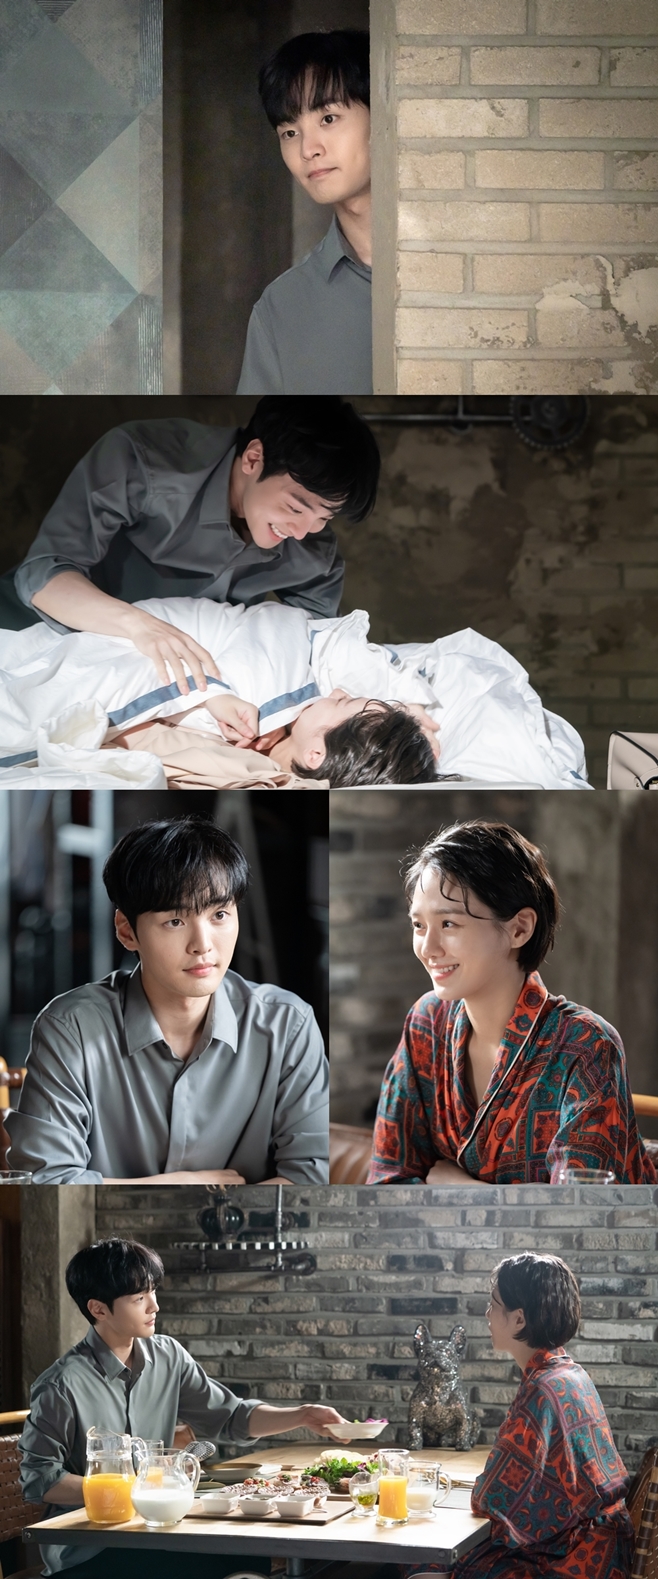 A scene was captured where Dali and Gamja-tang Kim Min-jae looked lovingly at Park Gyoo-yeong, who was asleep with a Morning Angel figure.KBS2 drama Dali and Gamja-tang (played by Son Eun-hye and director Lee Jung-seop) released SteelSeries on the 4th, which shows the images of Jin (Kim Min-jae) and Kim Dal-ri (Park Gyoo-yeong), who became his Morning Angel.In the 13th episode of Dali and Gamja-tang, which was broadcast on the 3rd, Muhak and the run continued to be misguided, causing sadness.Especially at the end of the broadcast, Muhak went out to find her when Dali was late at night and hugged her with relief.Muhak and Dali then confirmed their hearts once again with the Confessions, I love you with each other.In the meantime, the photo shows Muhak in his sleeping nightwear, which has just woken up, boasting a rustic but shiny visual and welcoming the morning.The night before, I feel a sense of unsureness in the peaceful appearance of Dalis I love you Confessions.Muhak is also looking at Dali, who is sleeping in his bed with a Morning Angel wrapped in a blanket, with warm and lovely eyes.A bright smile spread across Muhaks face gives him a premonition that the happiness index is at its peak.In addition, the SteelSeries featured Muhak and Dali, who had a sweet morning side by side at Muhaks house.The eyes of two people sitting at the table of Doran Doran and looking at each other are the eyes of the honey in love, and even those who see it are tingling.It makes the two people who have been in a bad situation due to the interference and subsequent incidents around them more await the broadcast of what happened after the I love you two-way competitions.Dally and Gamja-tang will be shown in the 14th episode of the Dalmu Couple, which has caused mismatch and saltiness, to spend a sweet morning time on the air.Id like you to check on how Muhak and Dali will show romantic scenes in episode 14. It airs every Wednesday and Thursday at 9:30 p.m.